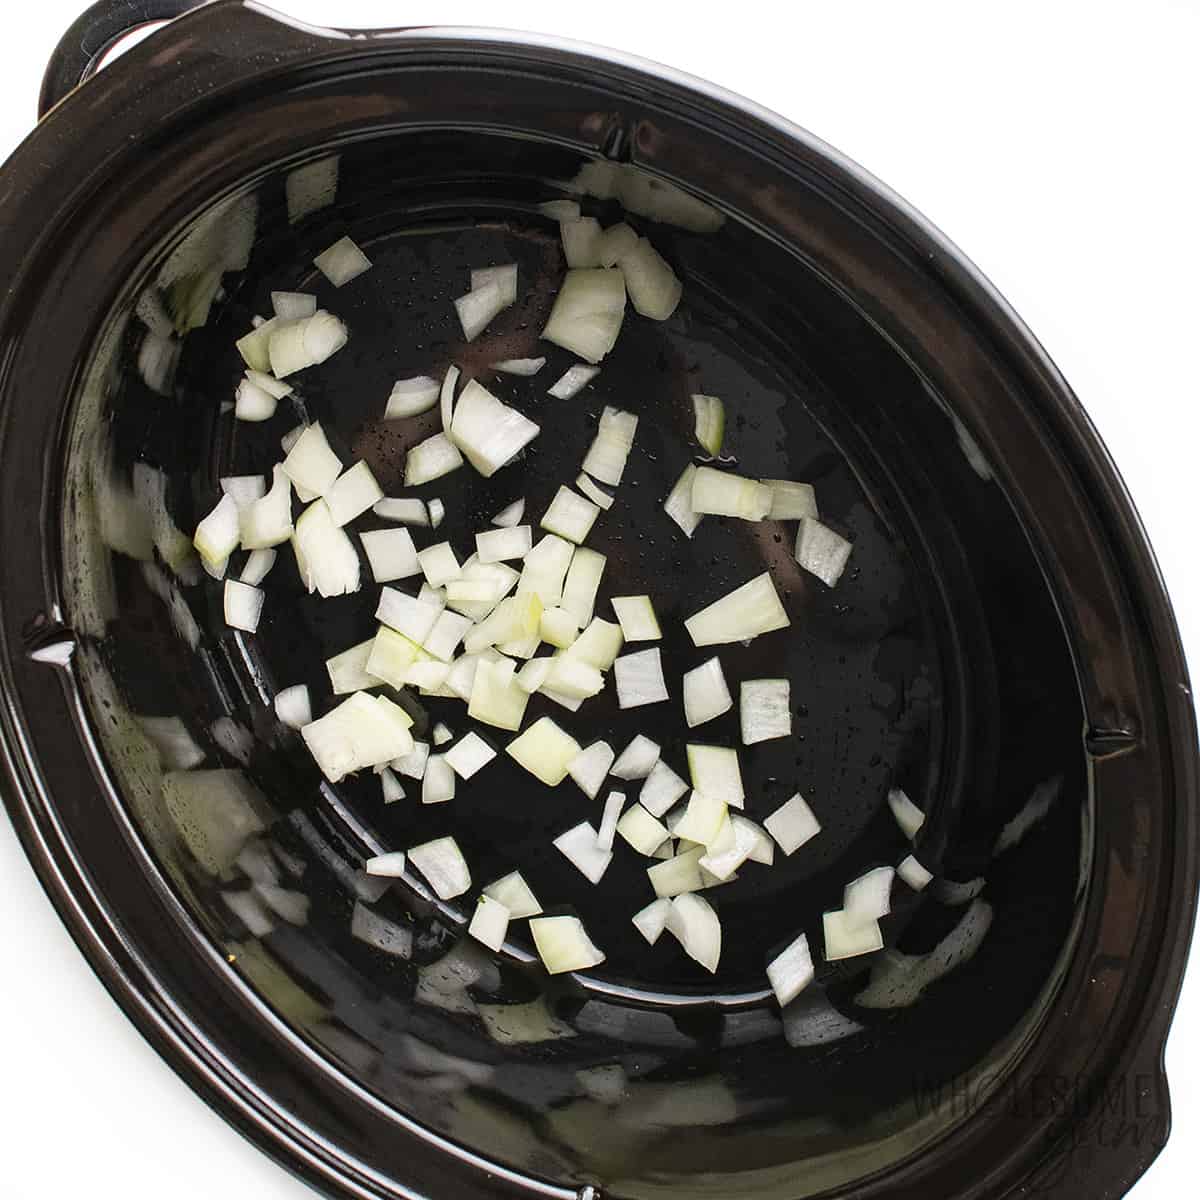 Diced onion in slow cooker.